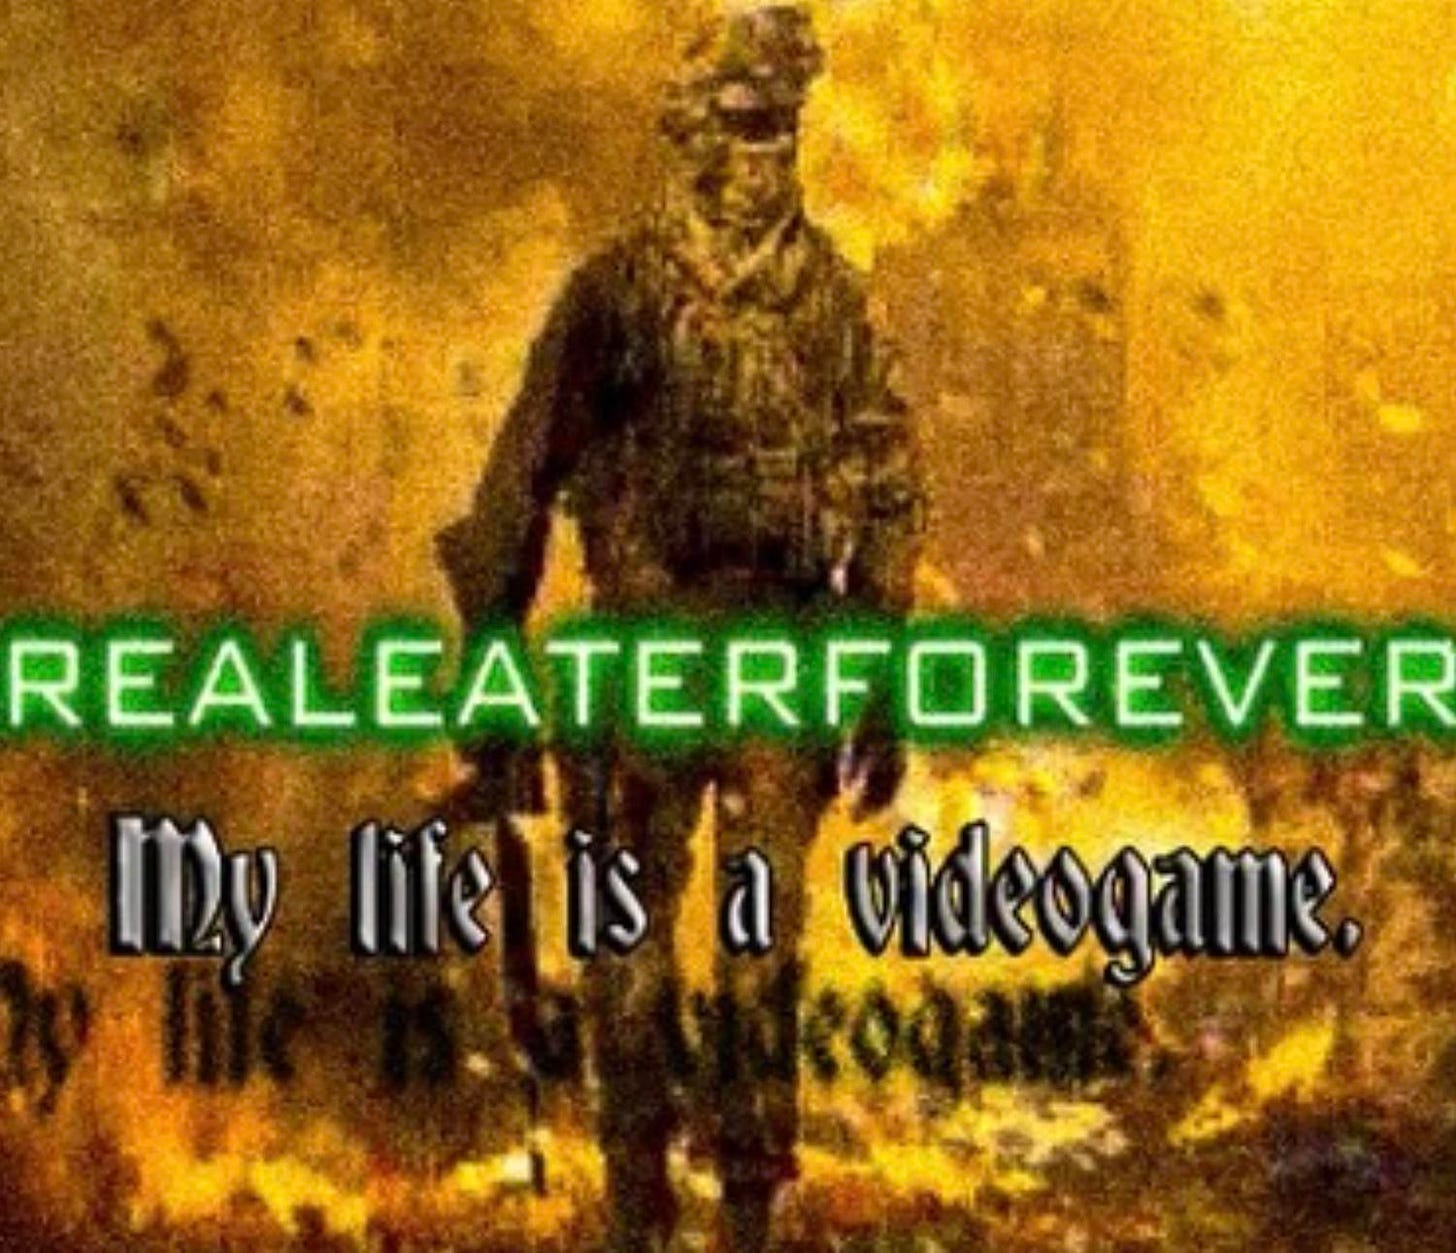 Realeaterforever’s profile picture on Instagram account realeaterforeverr